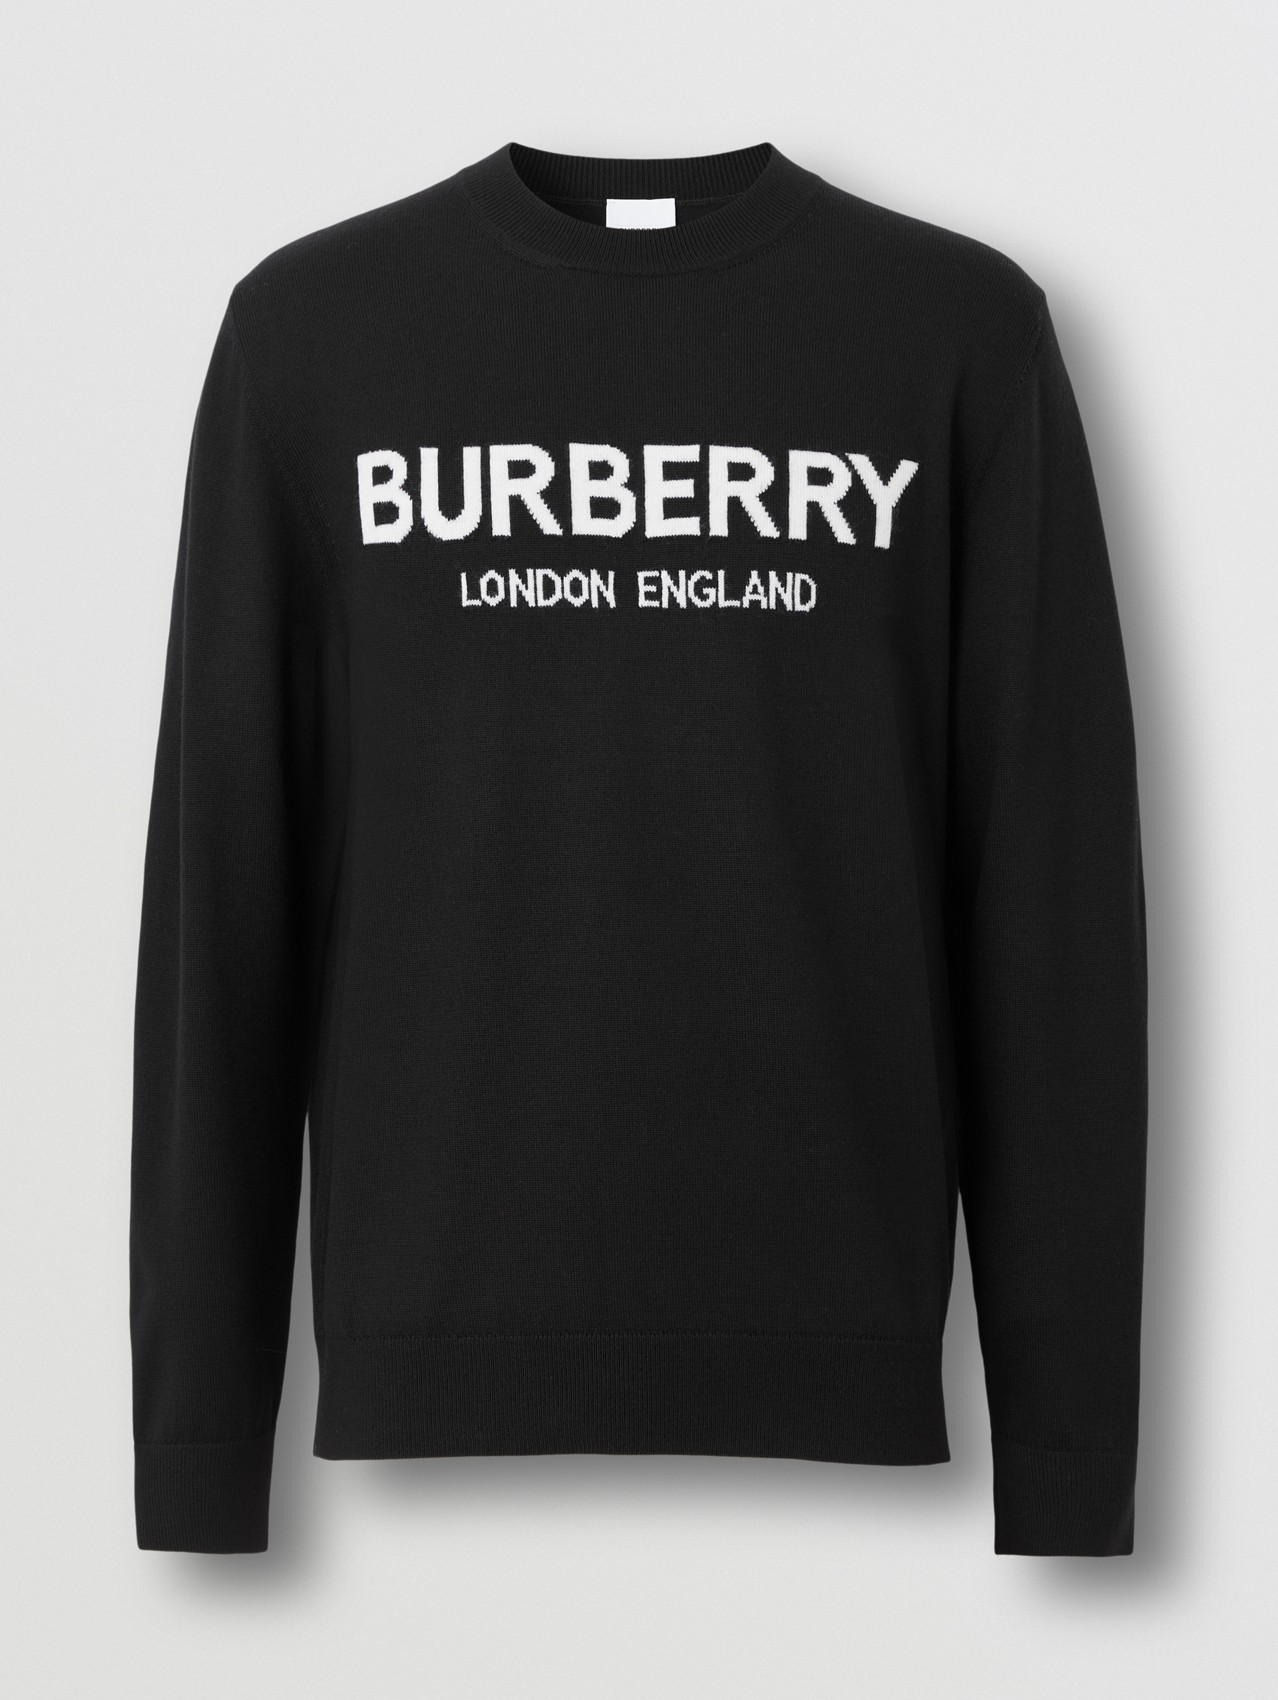 Burberry Burberry Sweater size L 